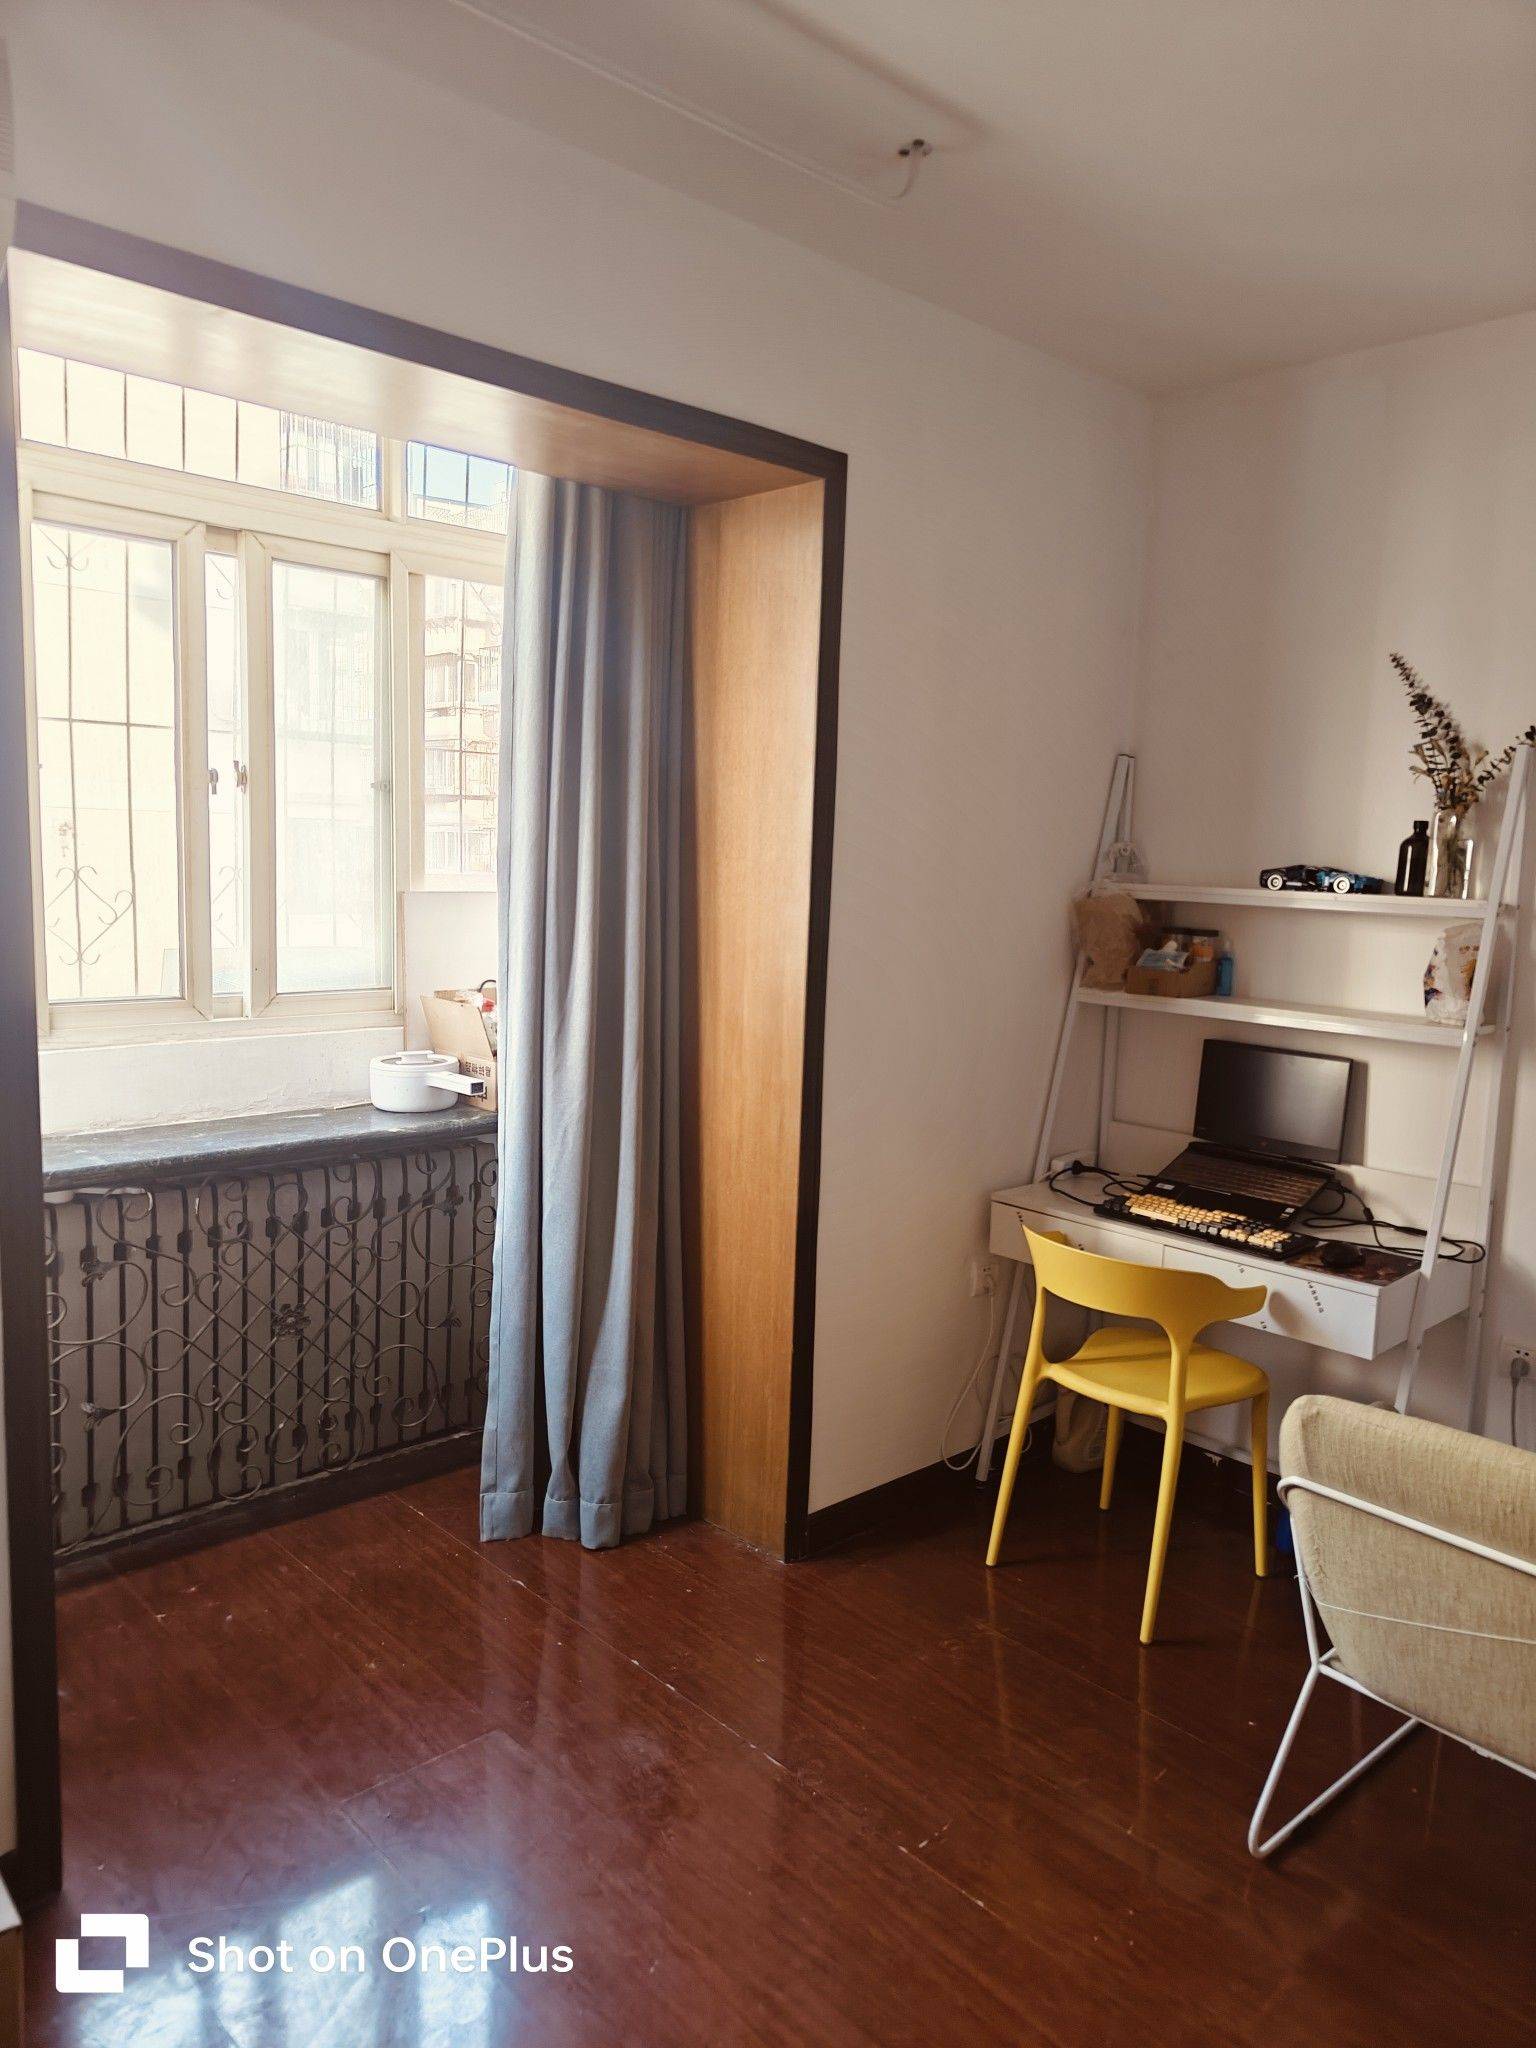 Tianjin-Hedong-Cozy Home,Clean&Comfy,Hustle & Bustle